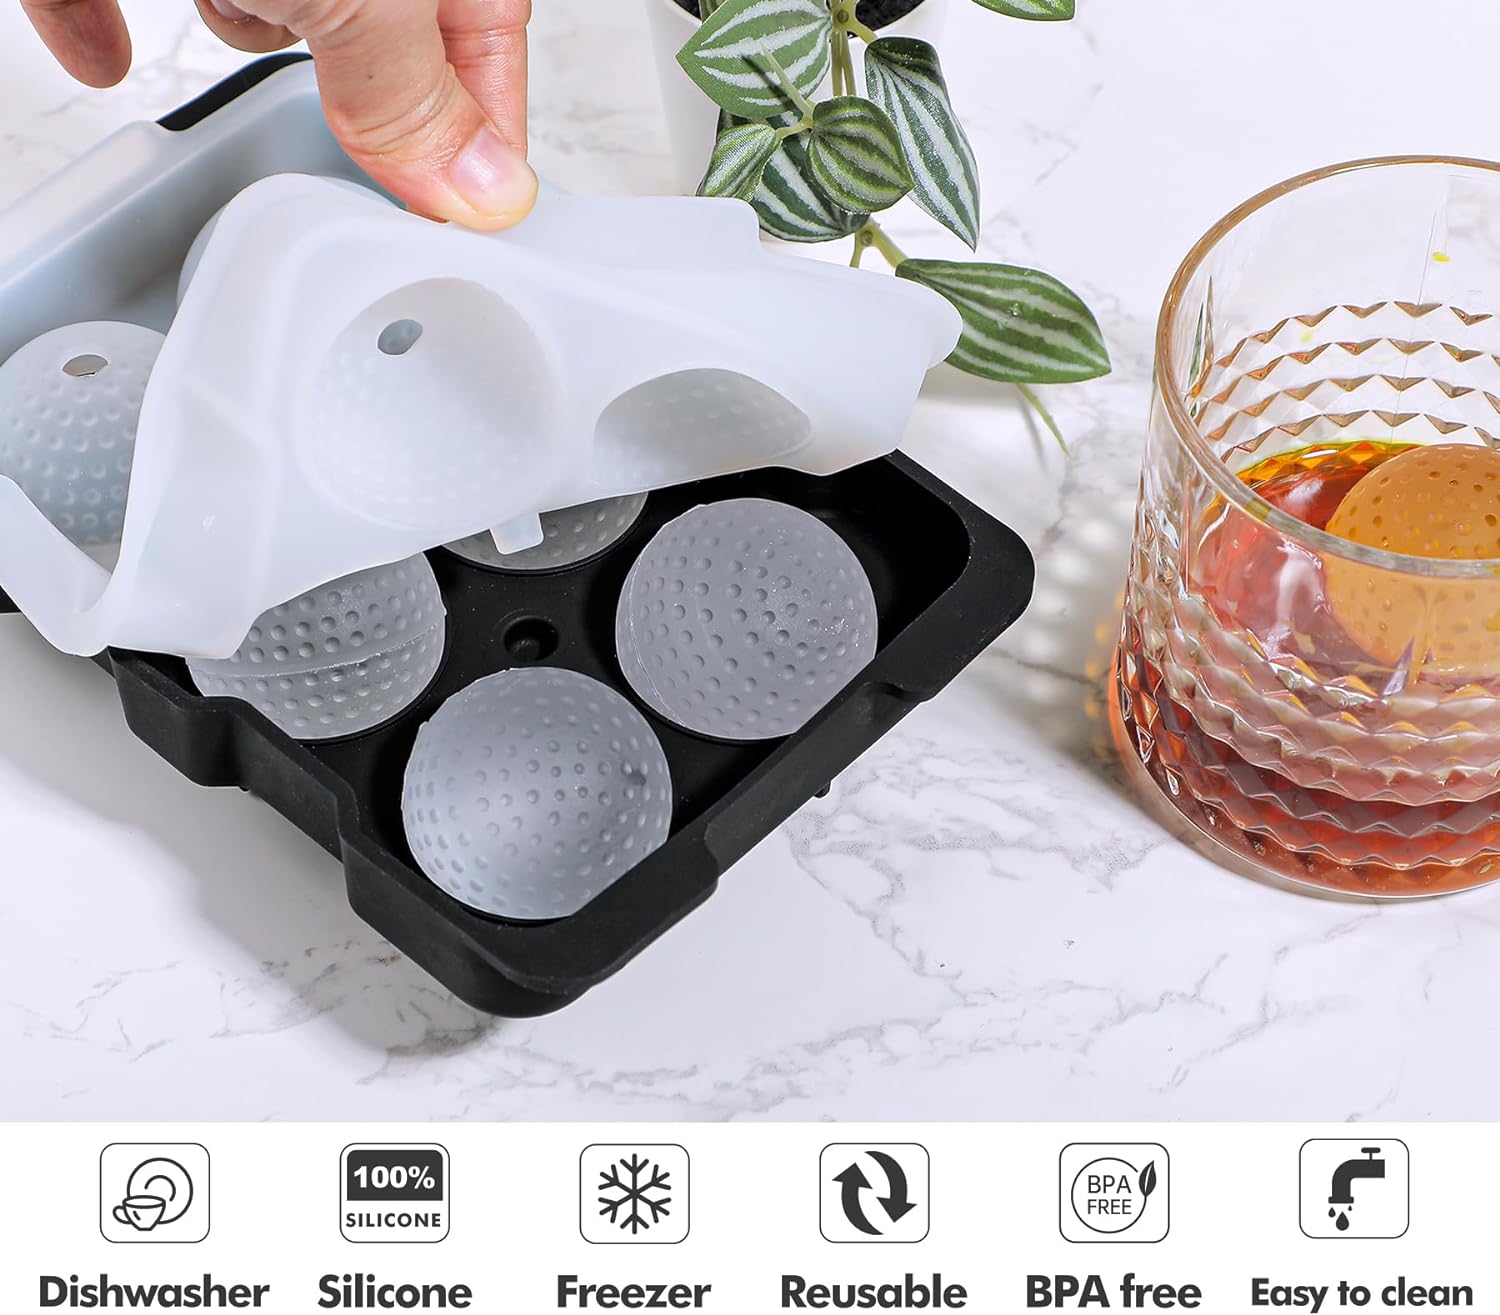 Reusable Silicone Skull Ice Ball Mold - 4 Small Sphere Ice Cubes